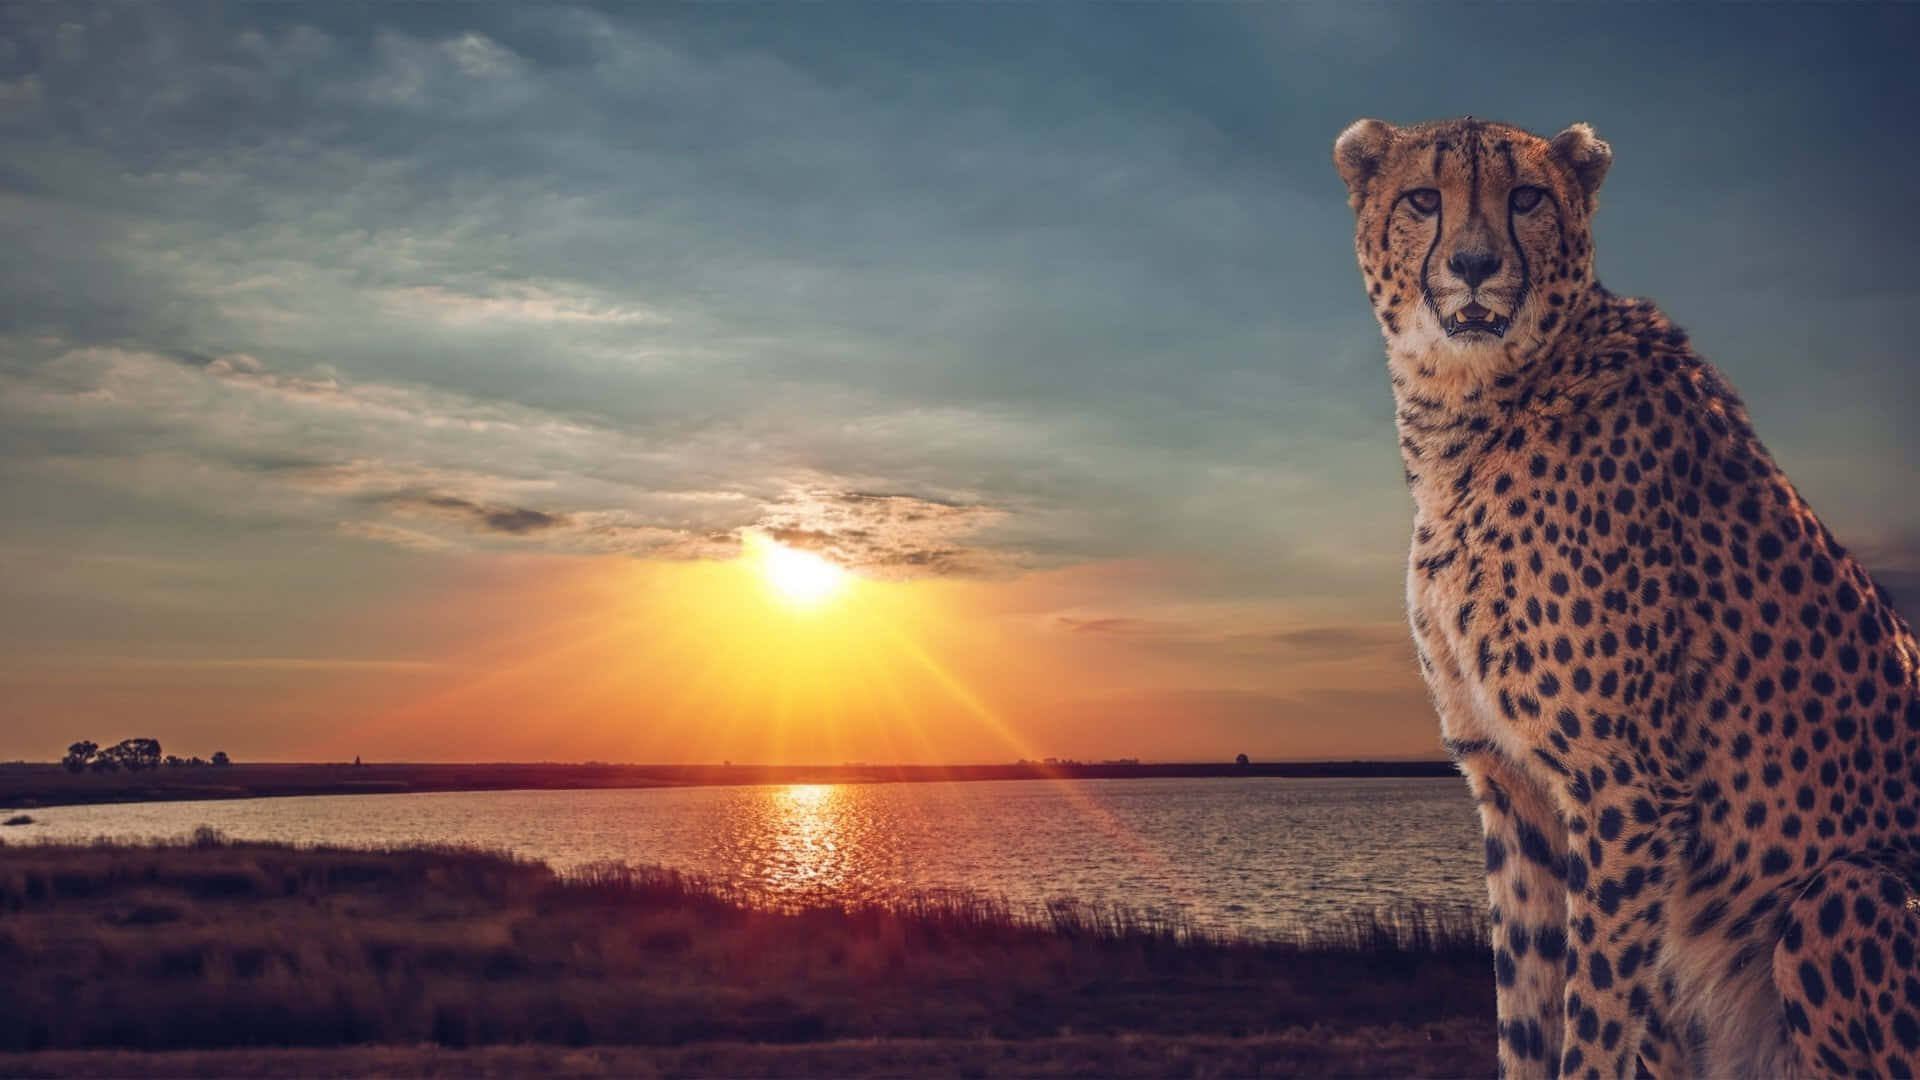 A Cheetah, the world's fastest animal, prowling in its natural environment Wallpaper